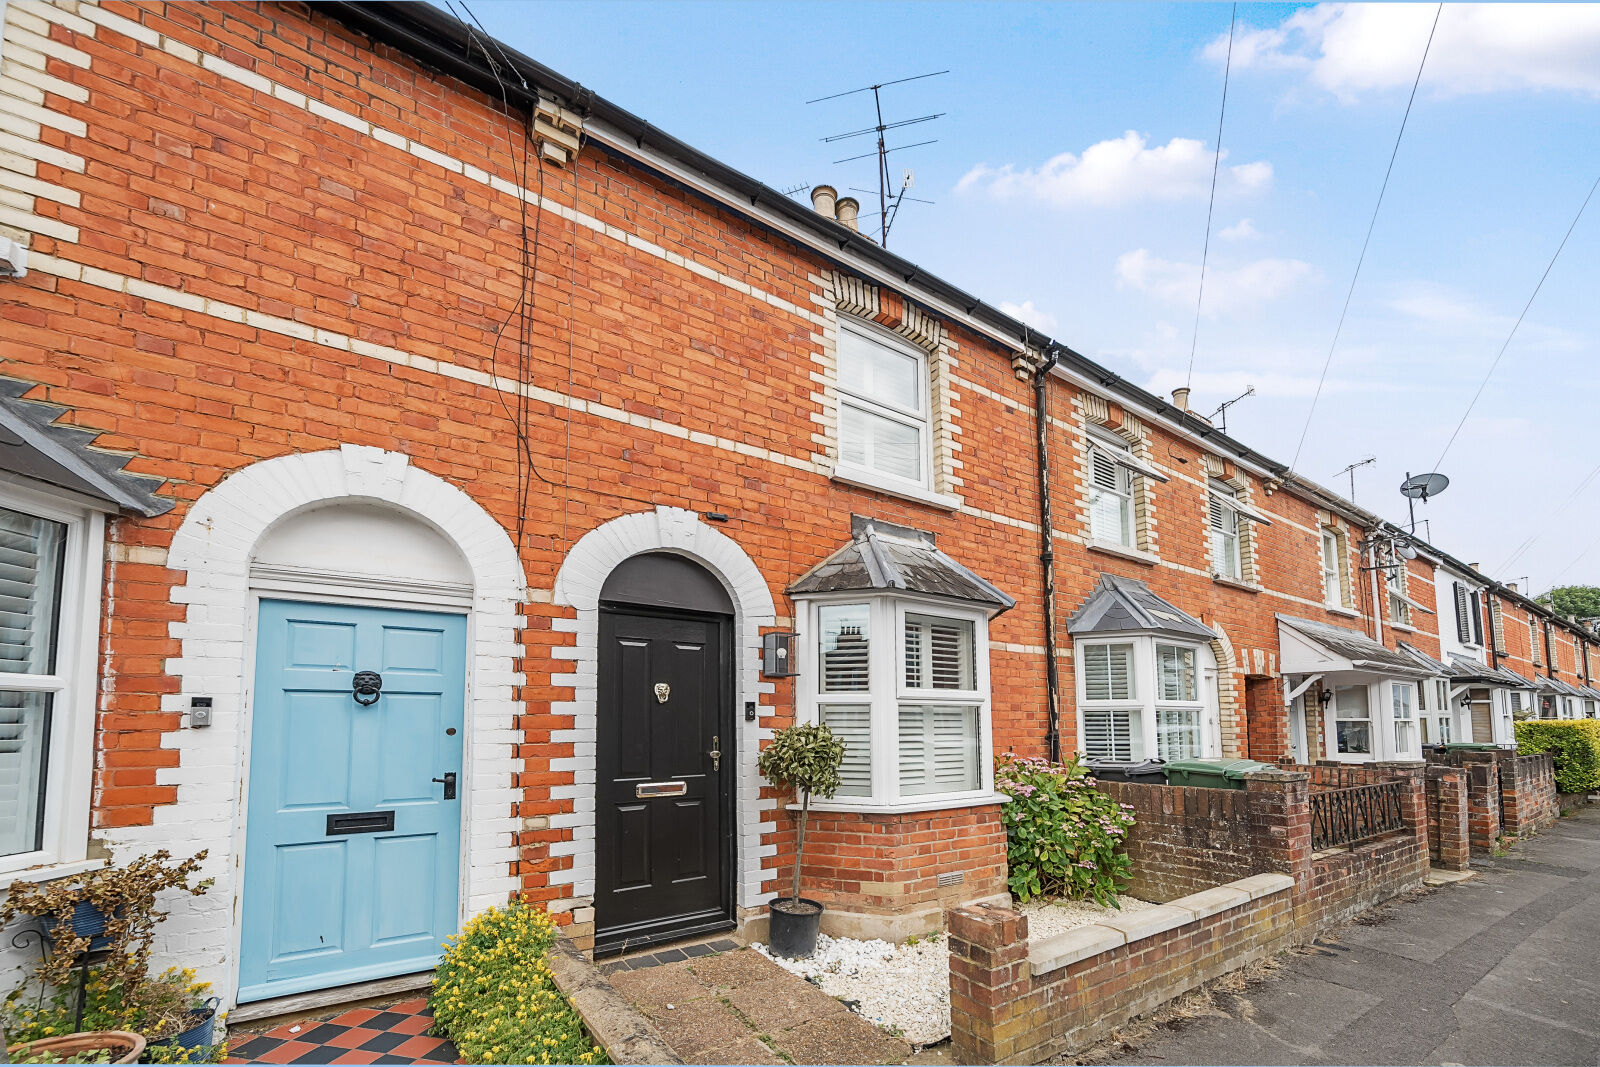 2 bedroom mid terraced house for sale Albert Road, Henley-on-Thames, RG9, main image